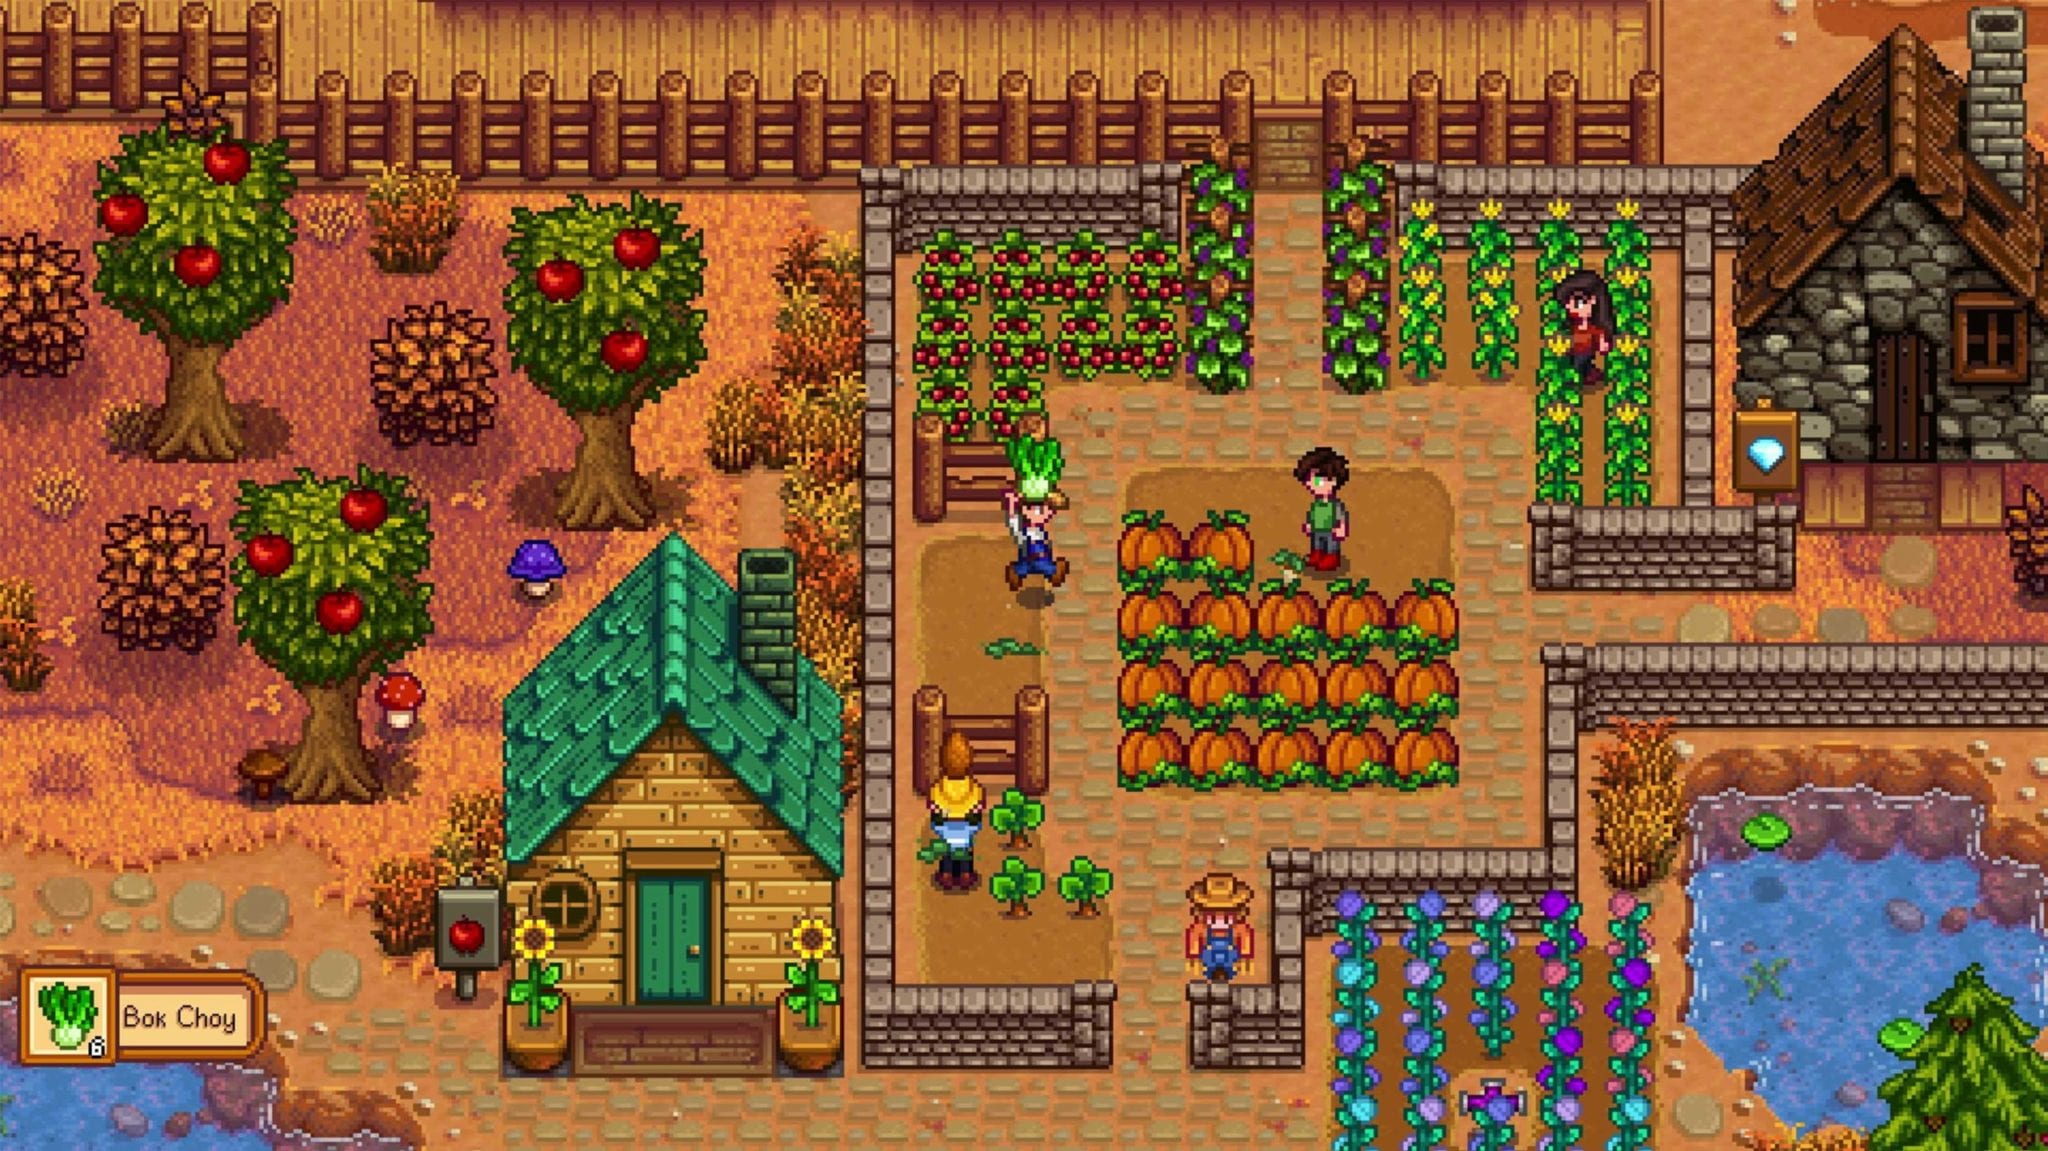 How To Do The New Stardew Valley MOBILE Item Duplication GLITCH